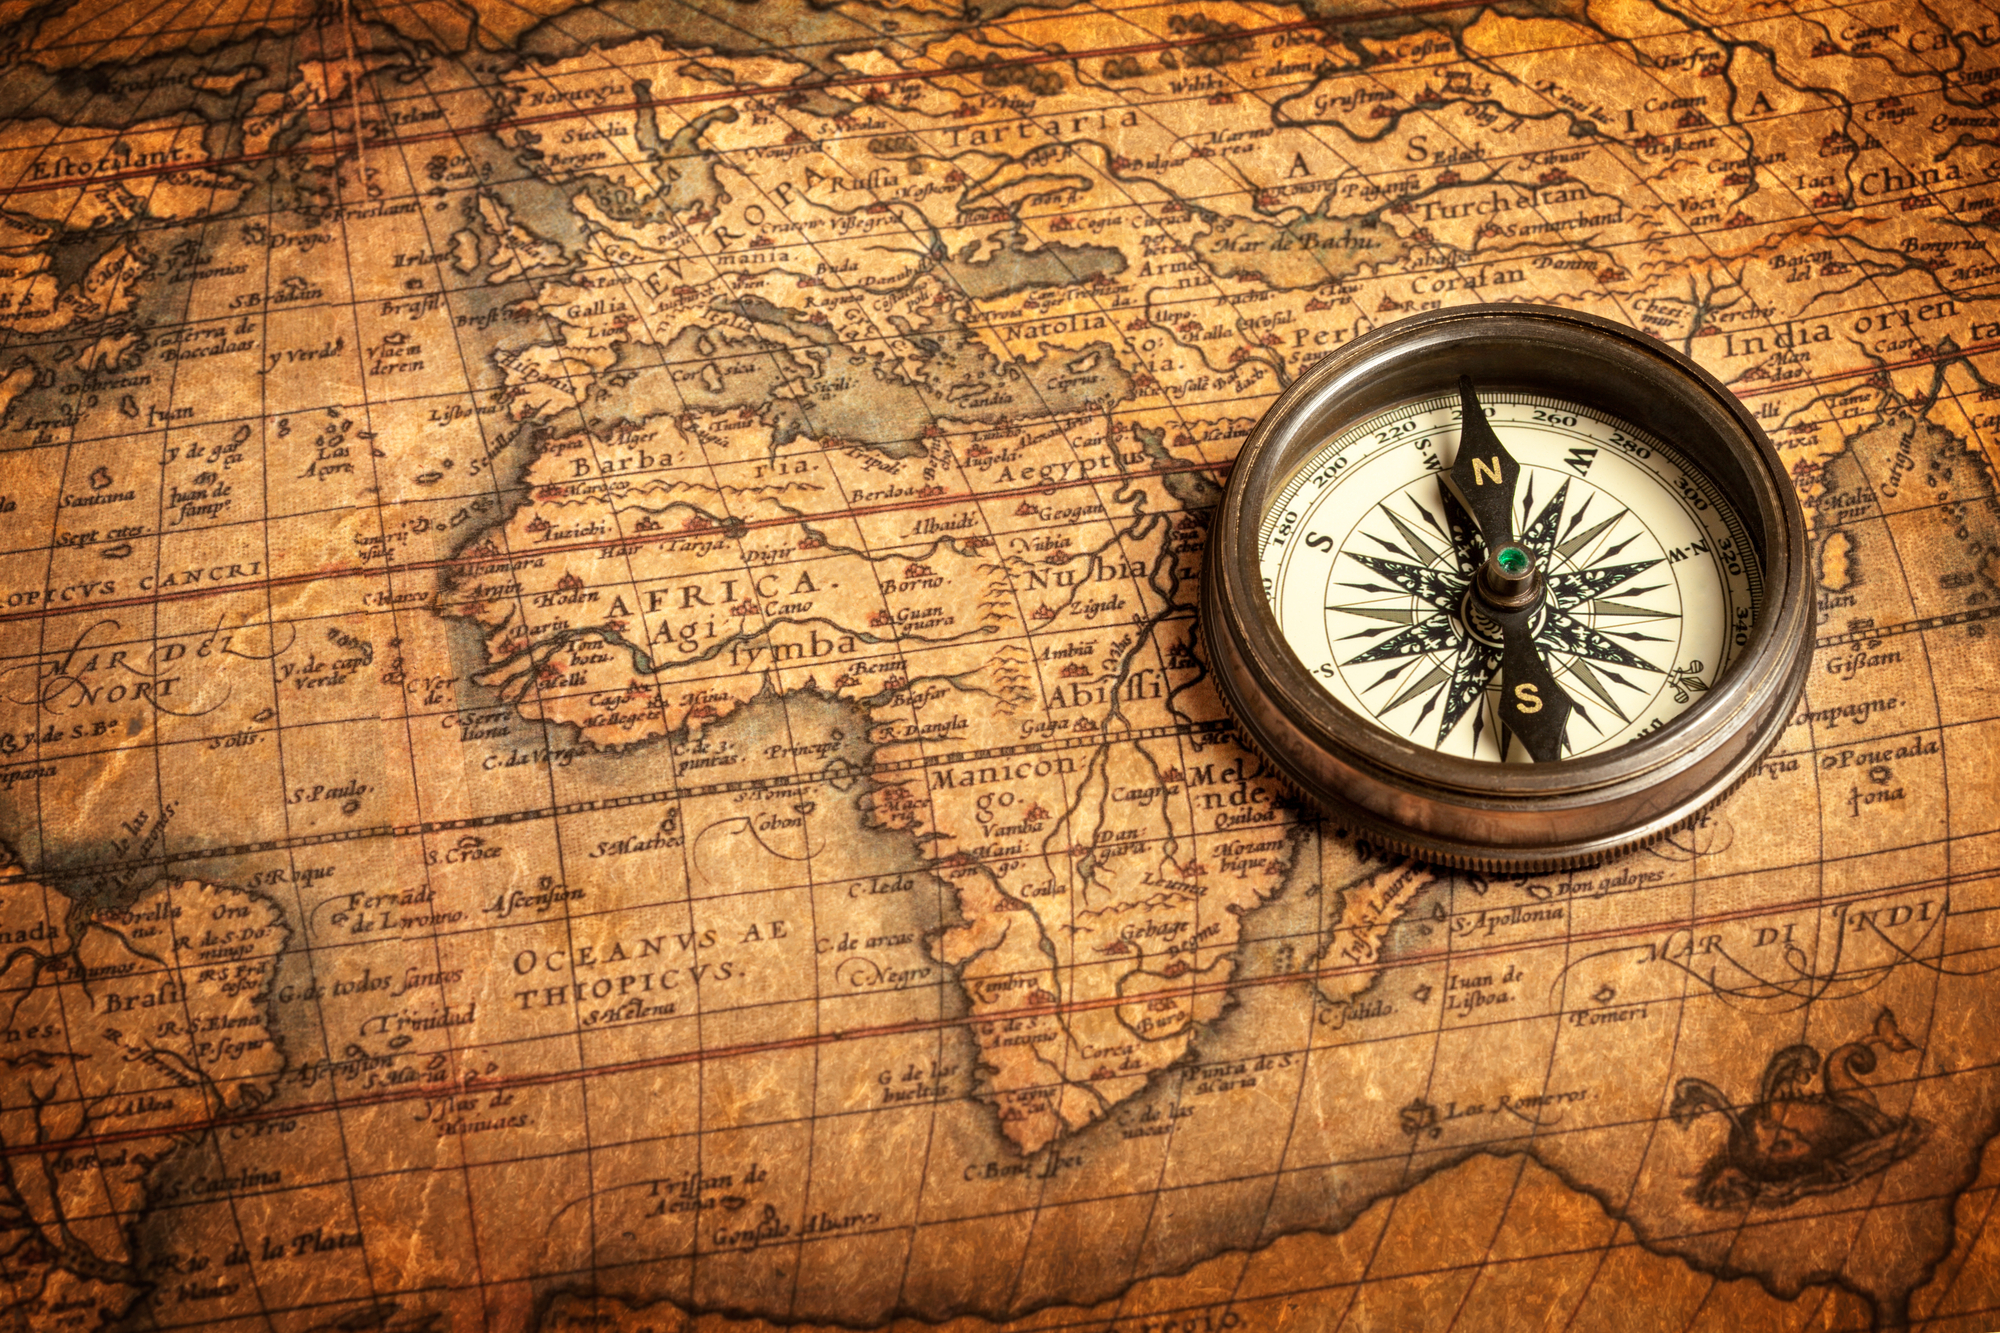 An antique compass rests on an old map of countries on planet Earth